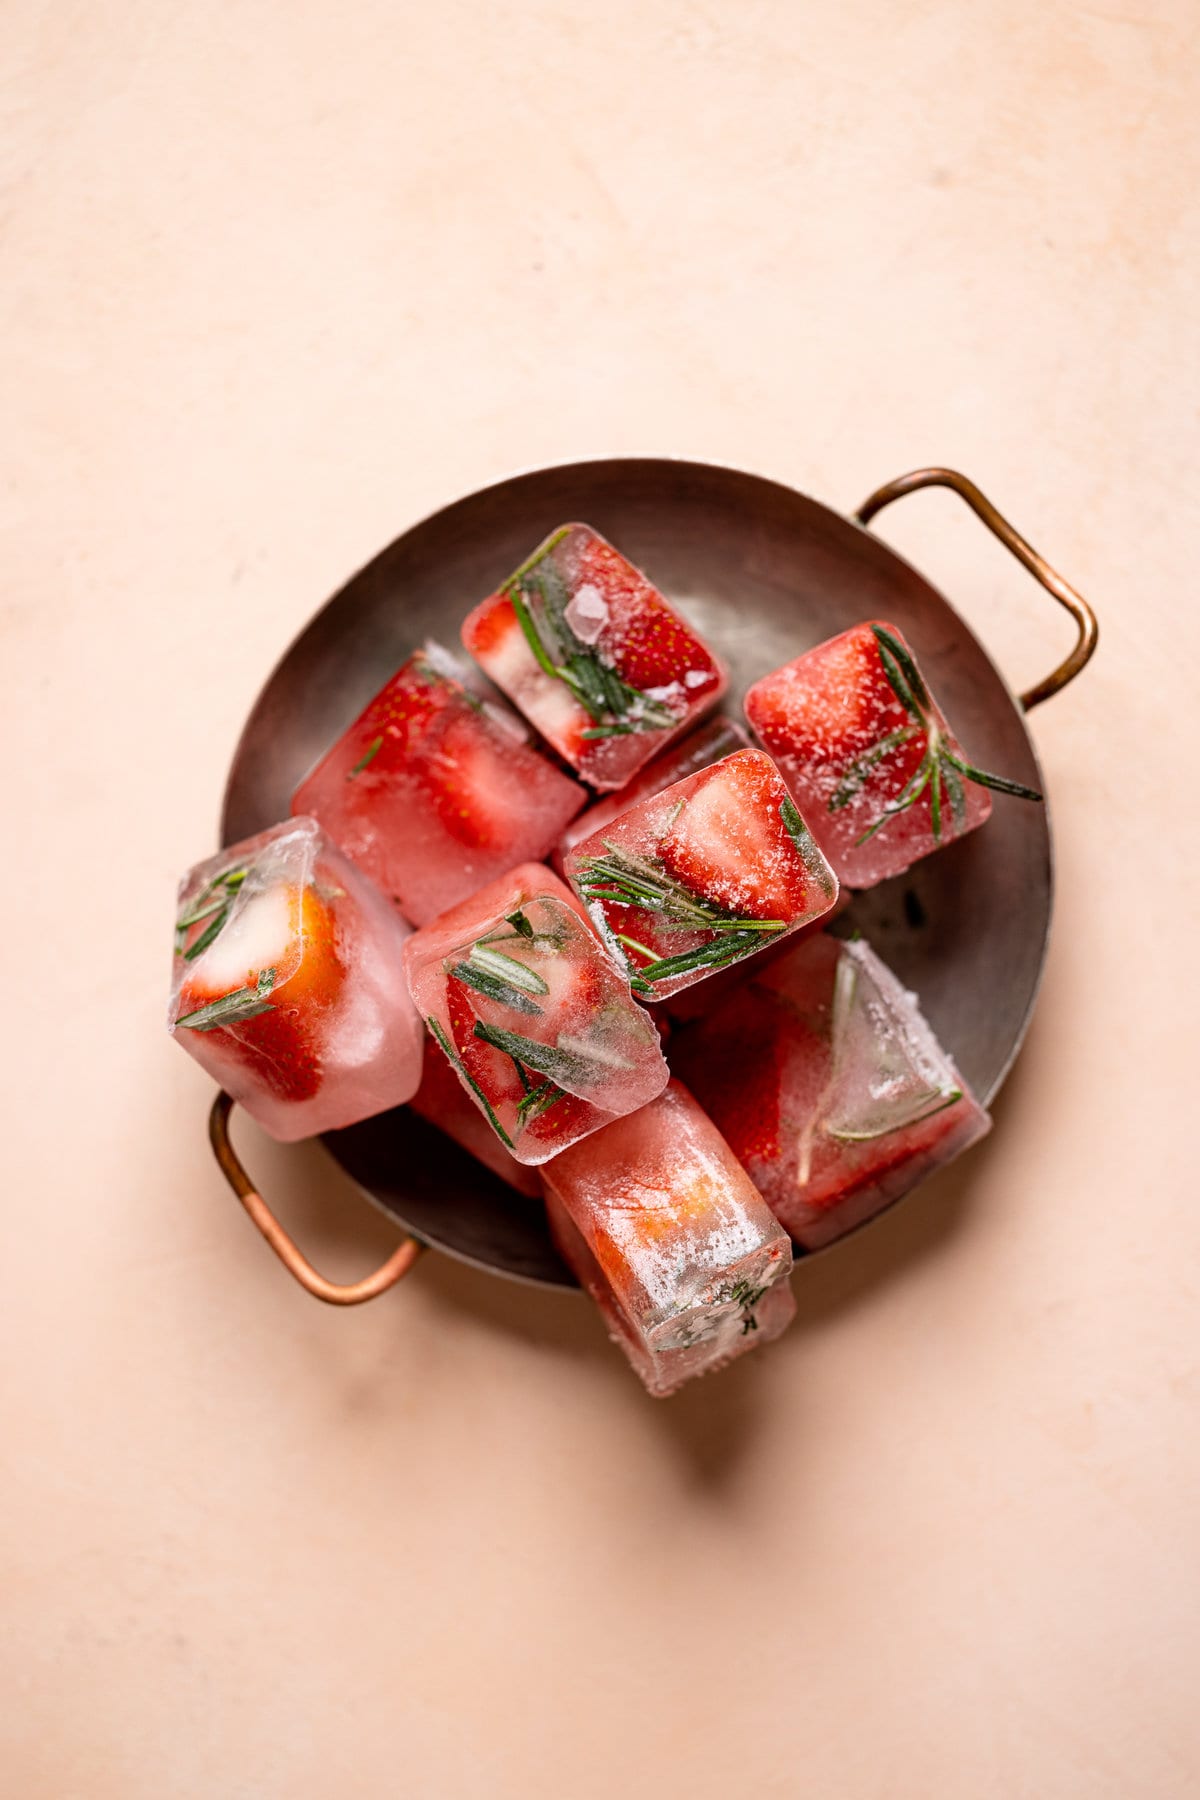 Pile of strawberry rosemary ice cubes